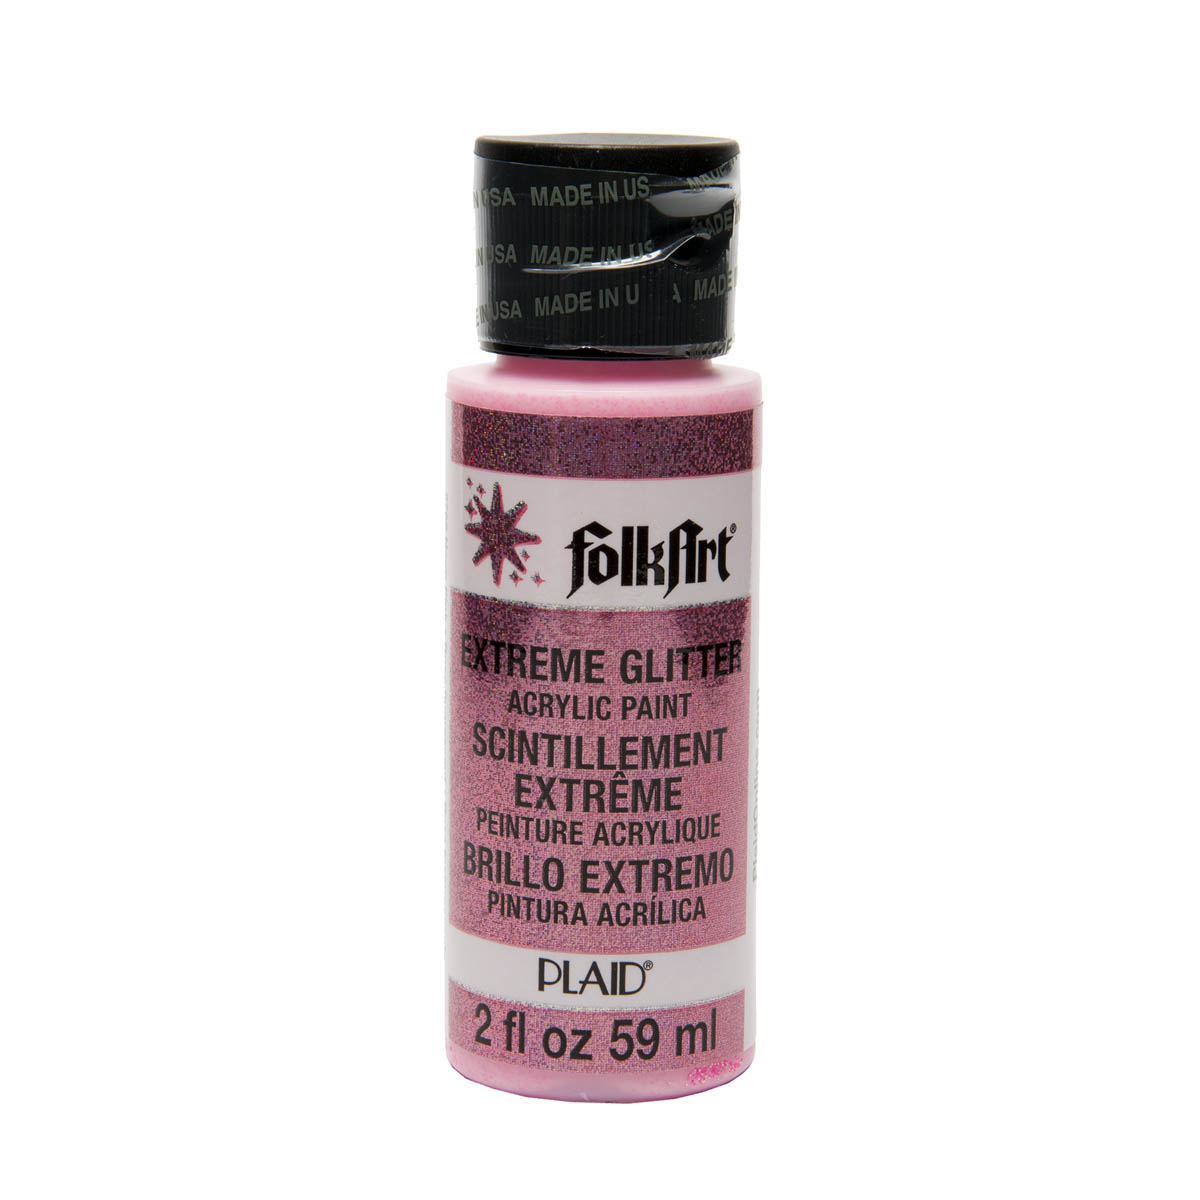 Folkart Extreme Glitter Acrylic Paint in Assorted Colors (2 Oz), 2796,  Hologram